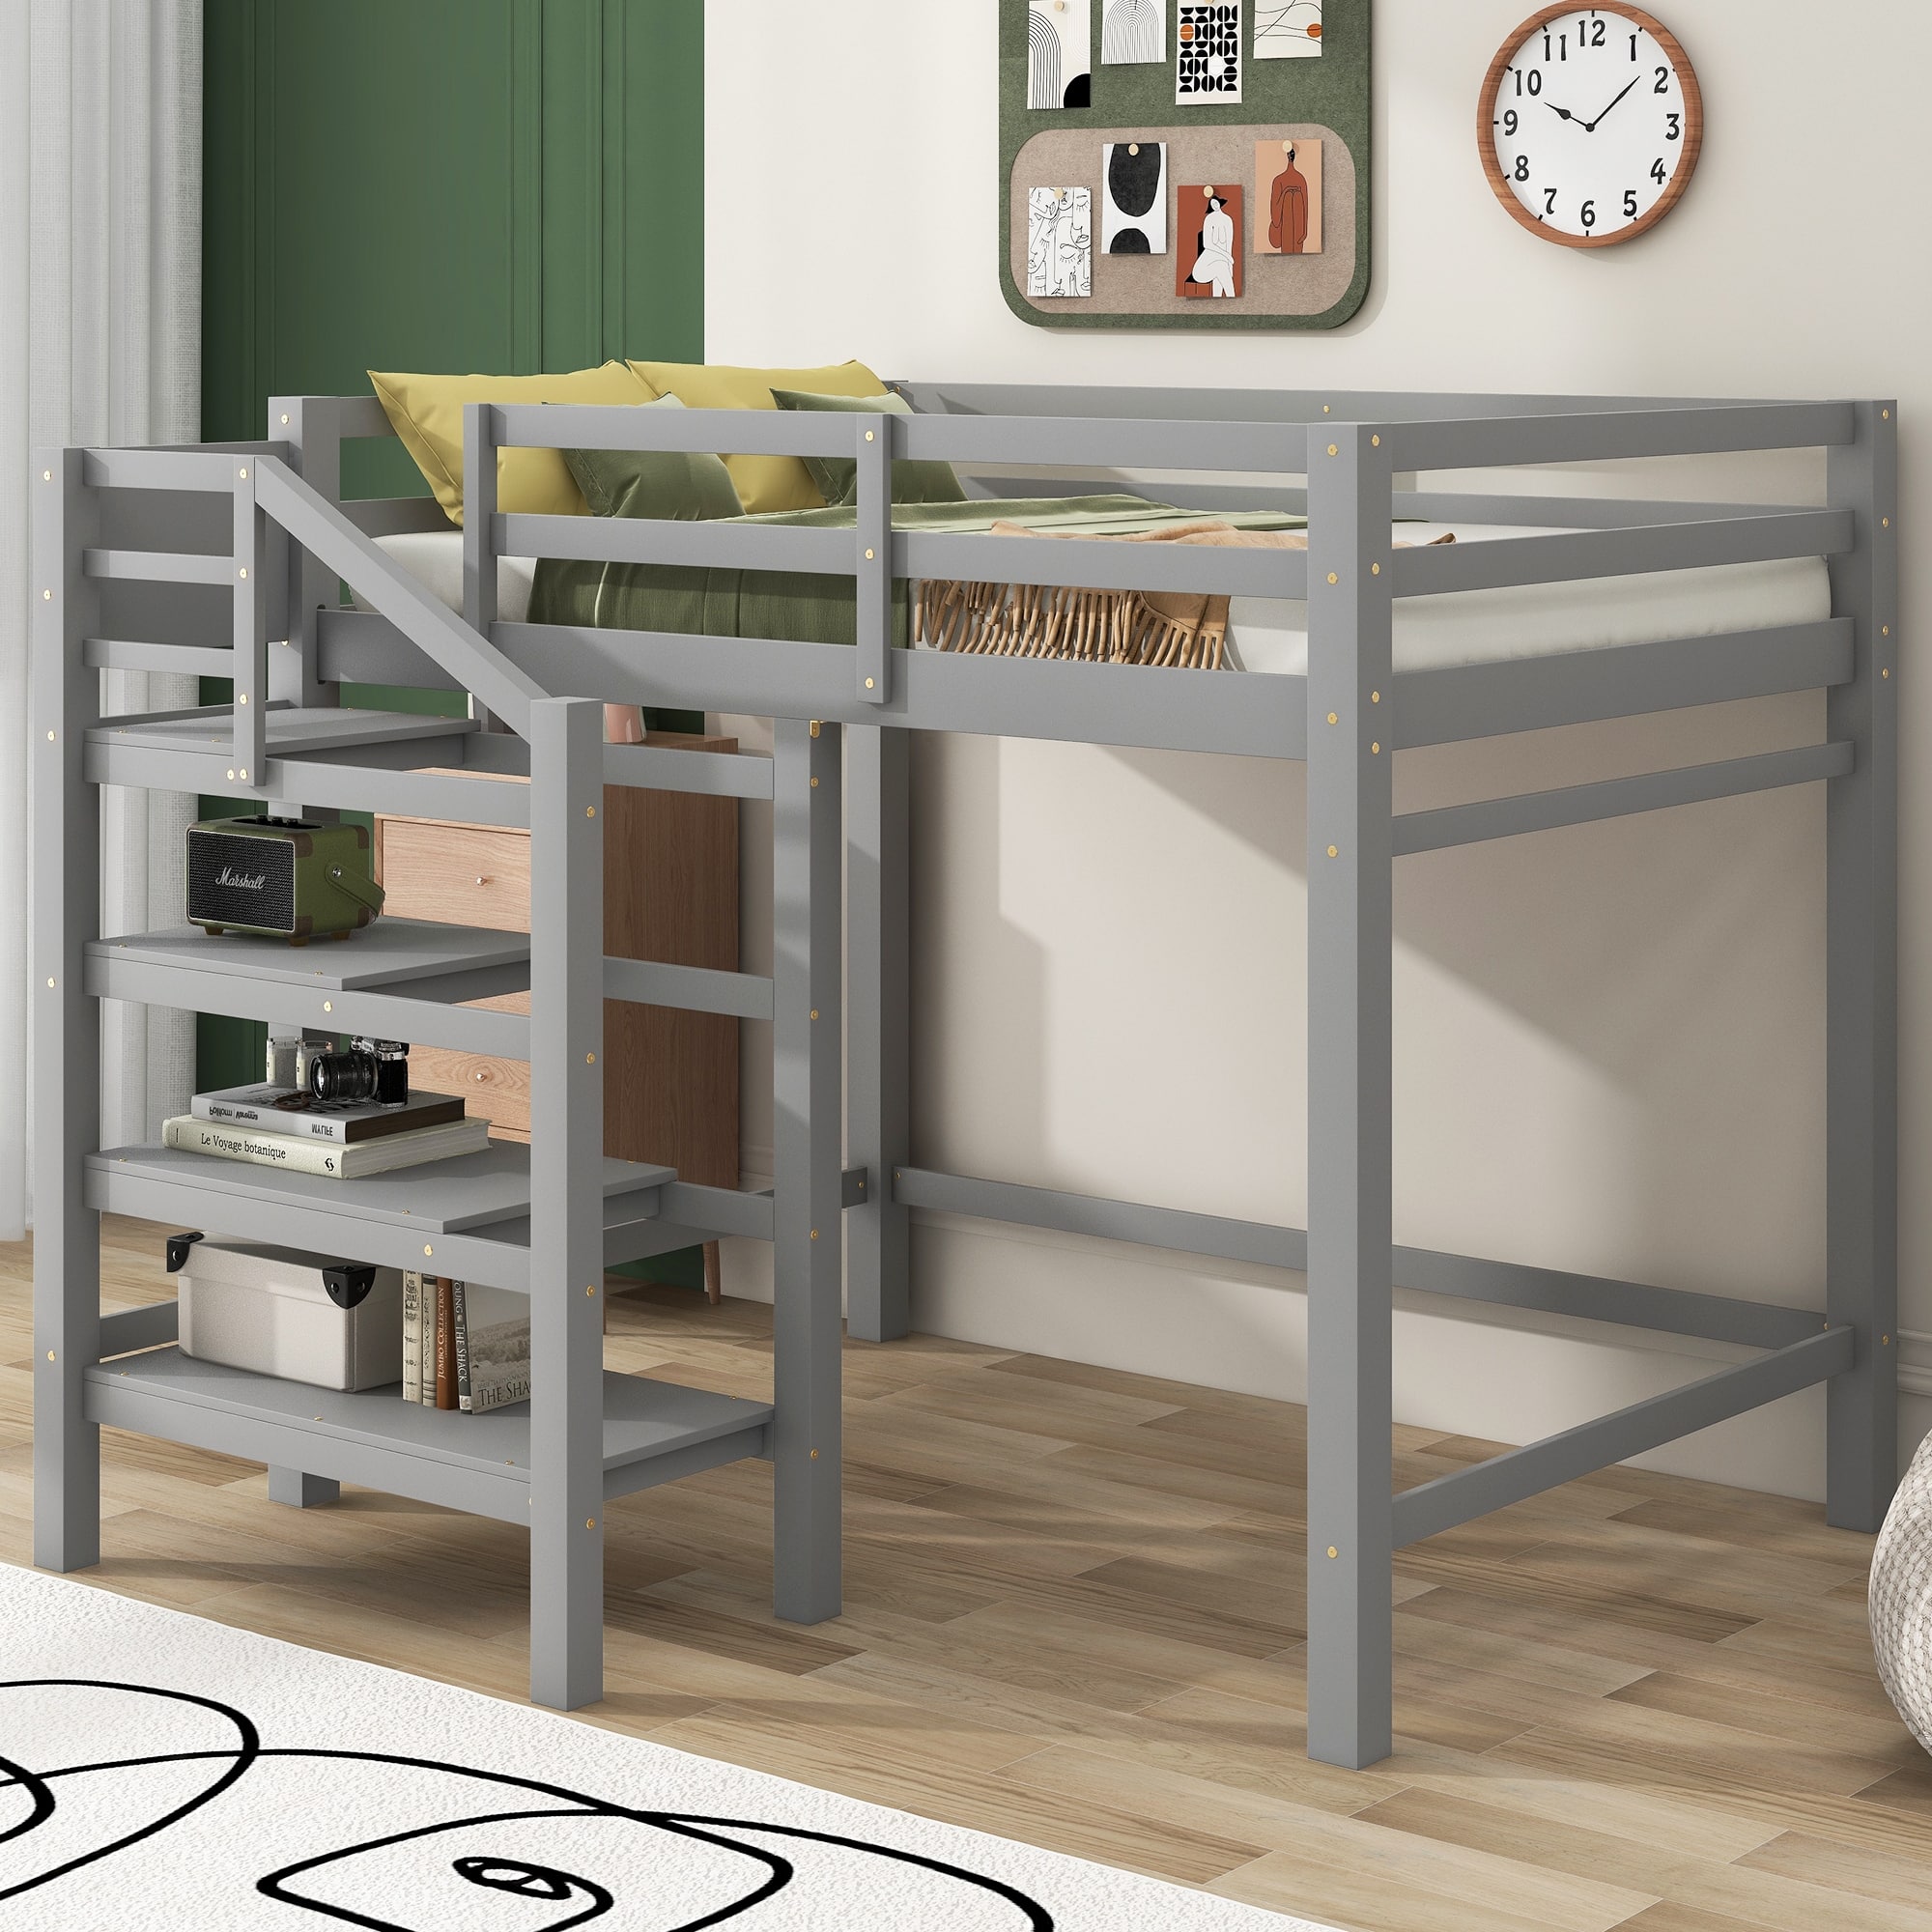 Full Size Wood Loft Bed w/Built-in Storage Stairs & Hanger for Clothes ...